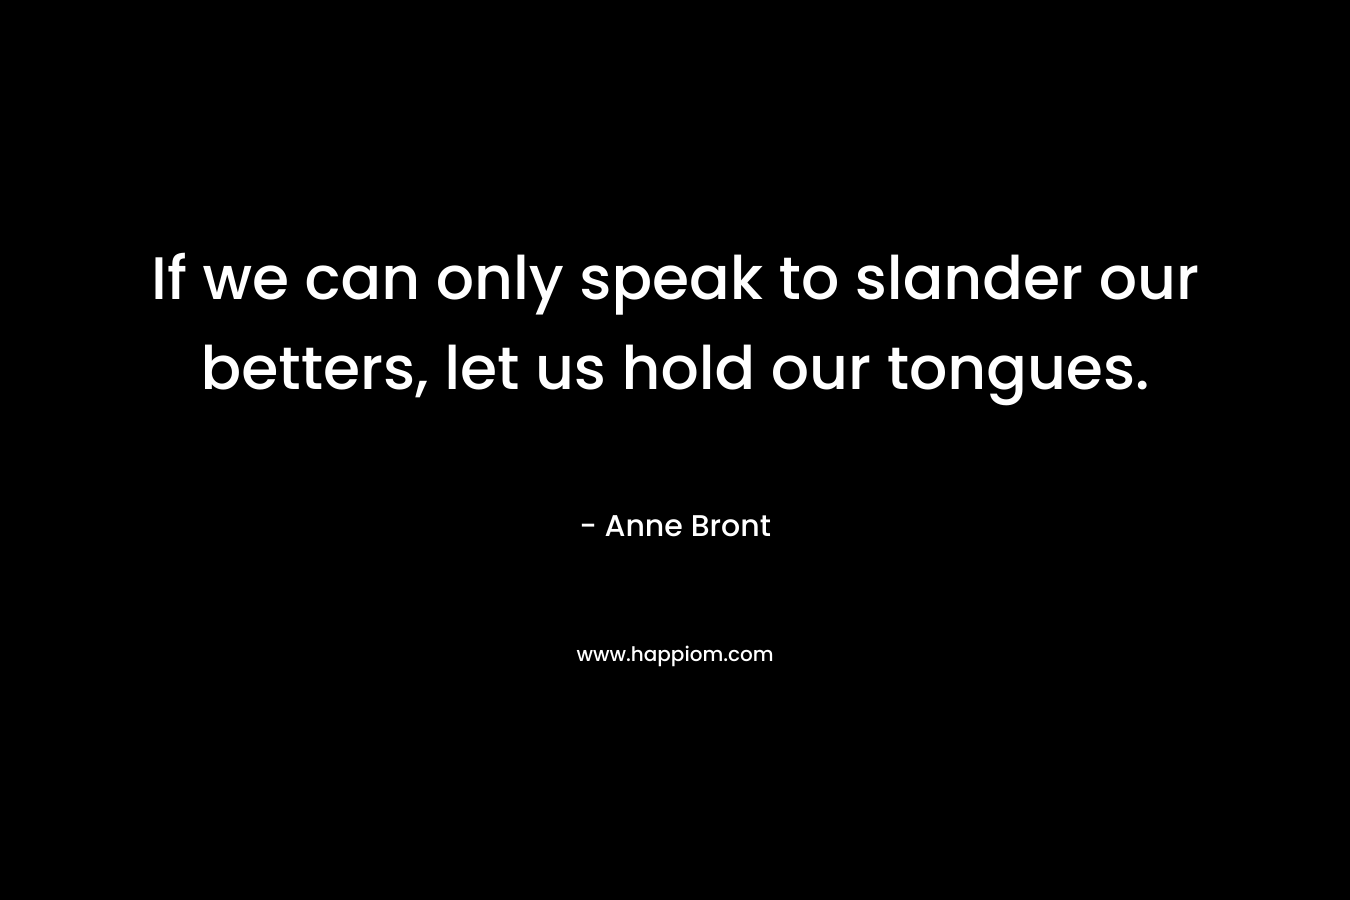 If we can only speak to slander our betters, let us hold our tongues. – Anne Bront